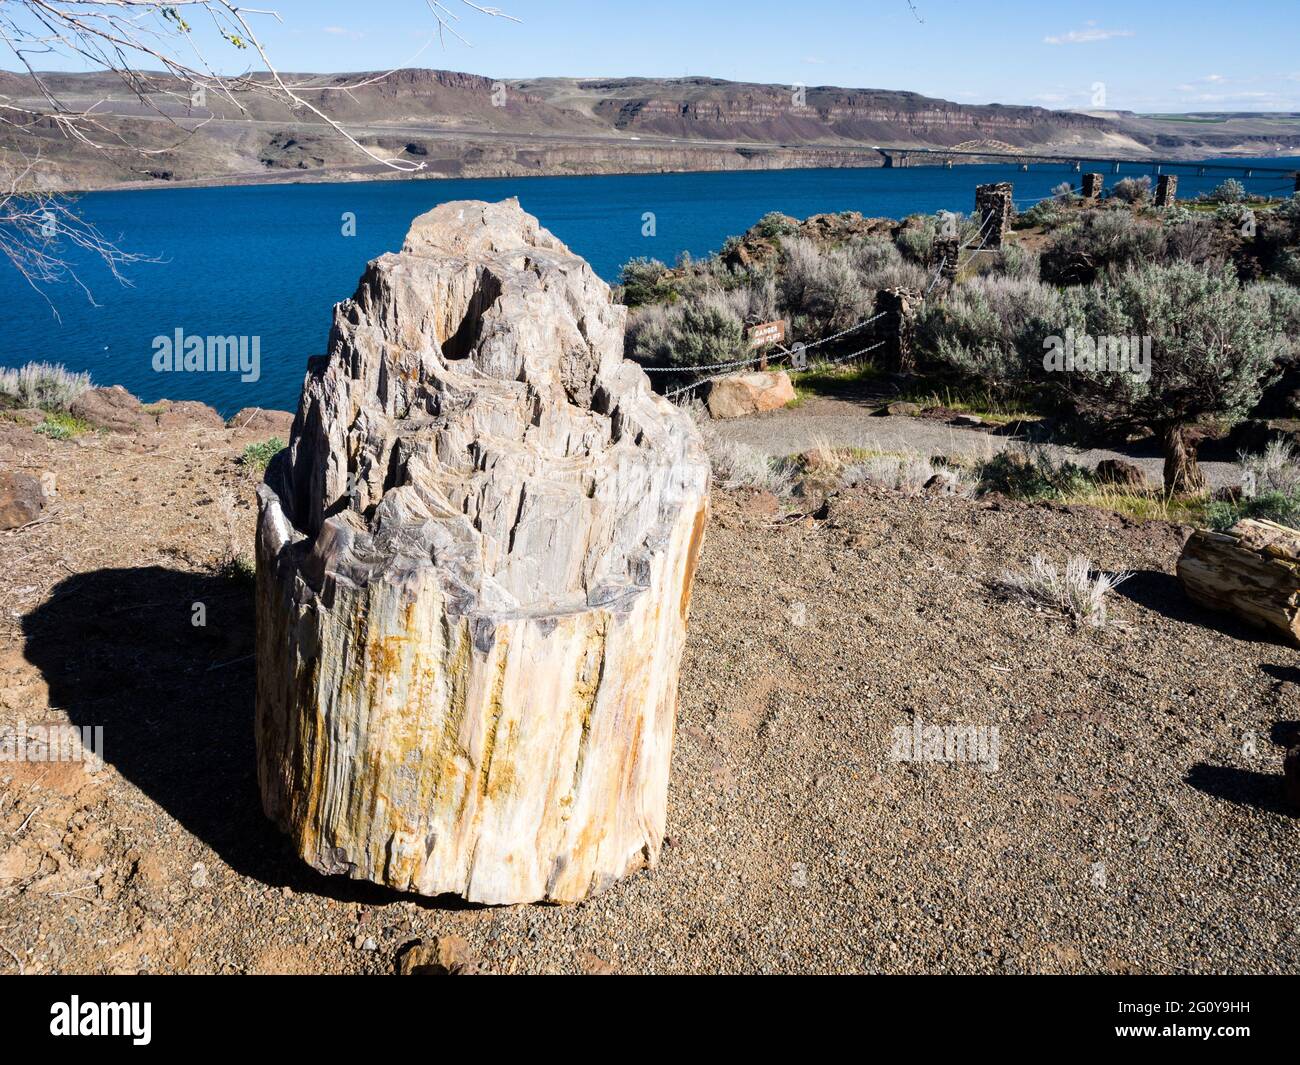 Ginkgo Petrified Forest State Park in Washington state Stock Photo